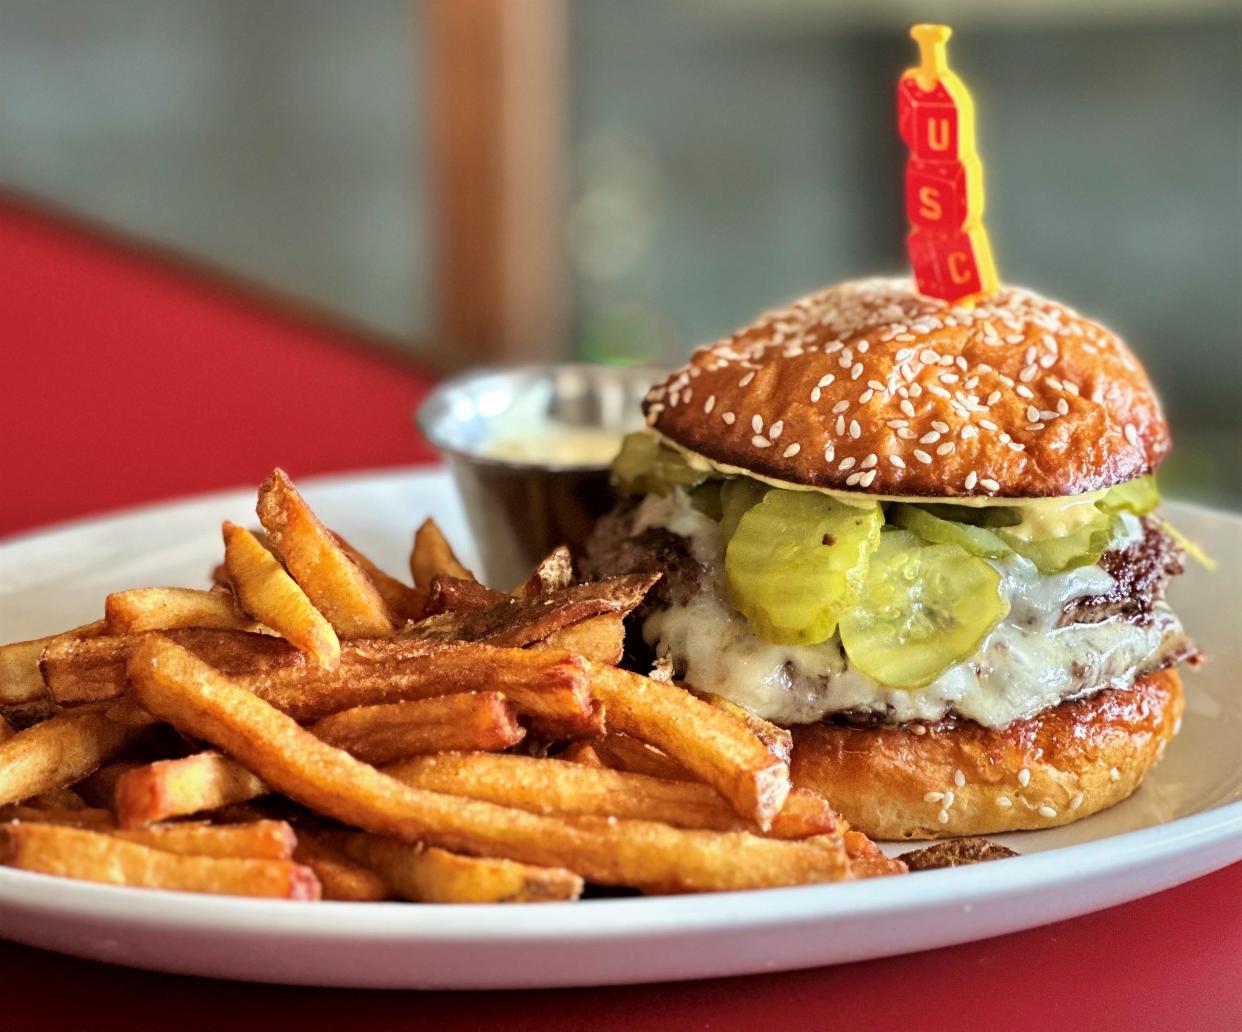 Ever wondered what a cheeseburger designed by barbecue wizard Aaron Franklin would taste like? You can find out in the evenings at Uptown Sports Club.